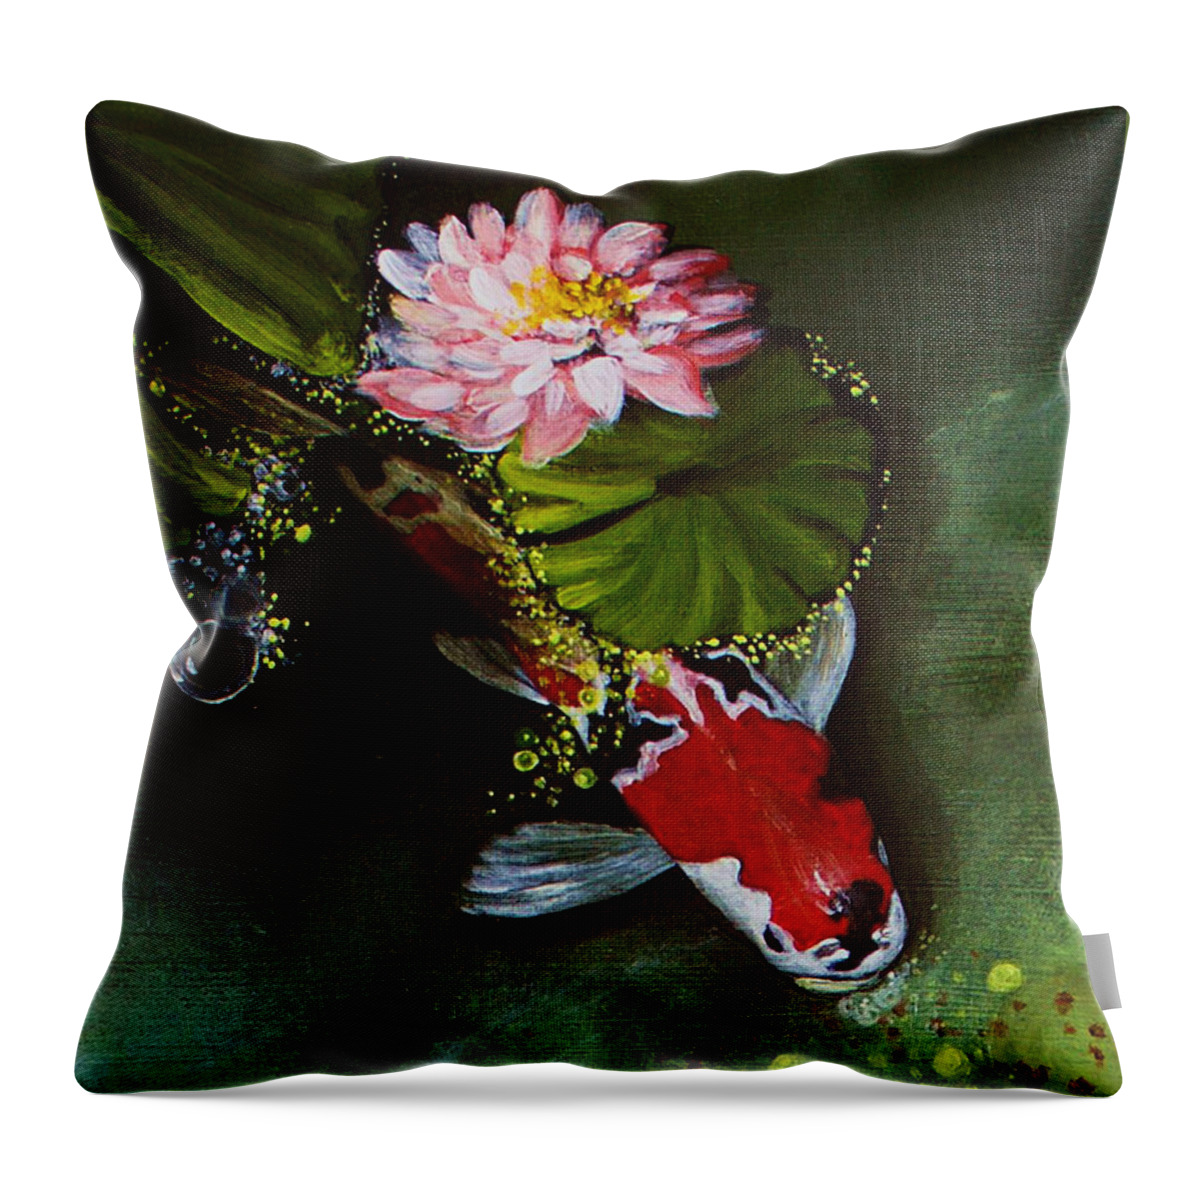 Koi Pond Throw Pillow featuring the painting Gathering In Light Up close #2 by Vivian Casey Fine Art